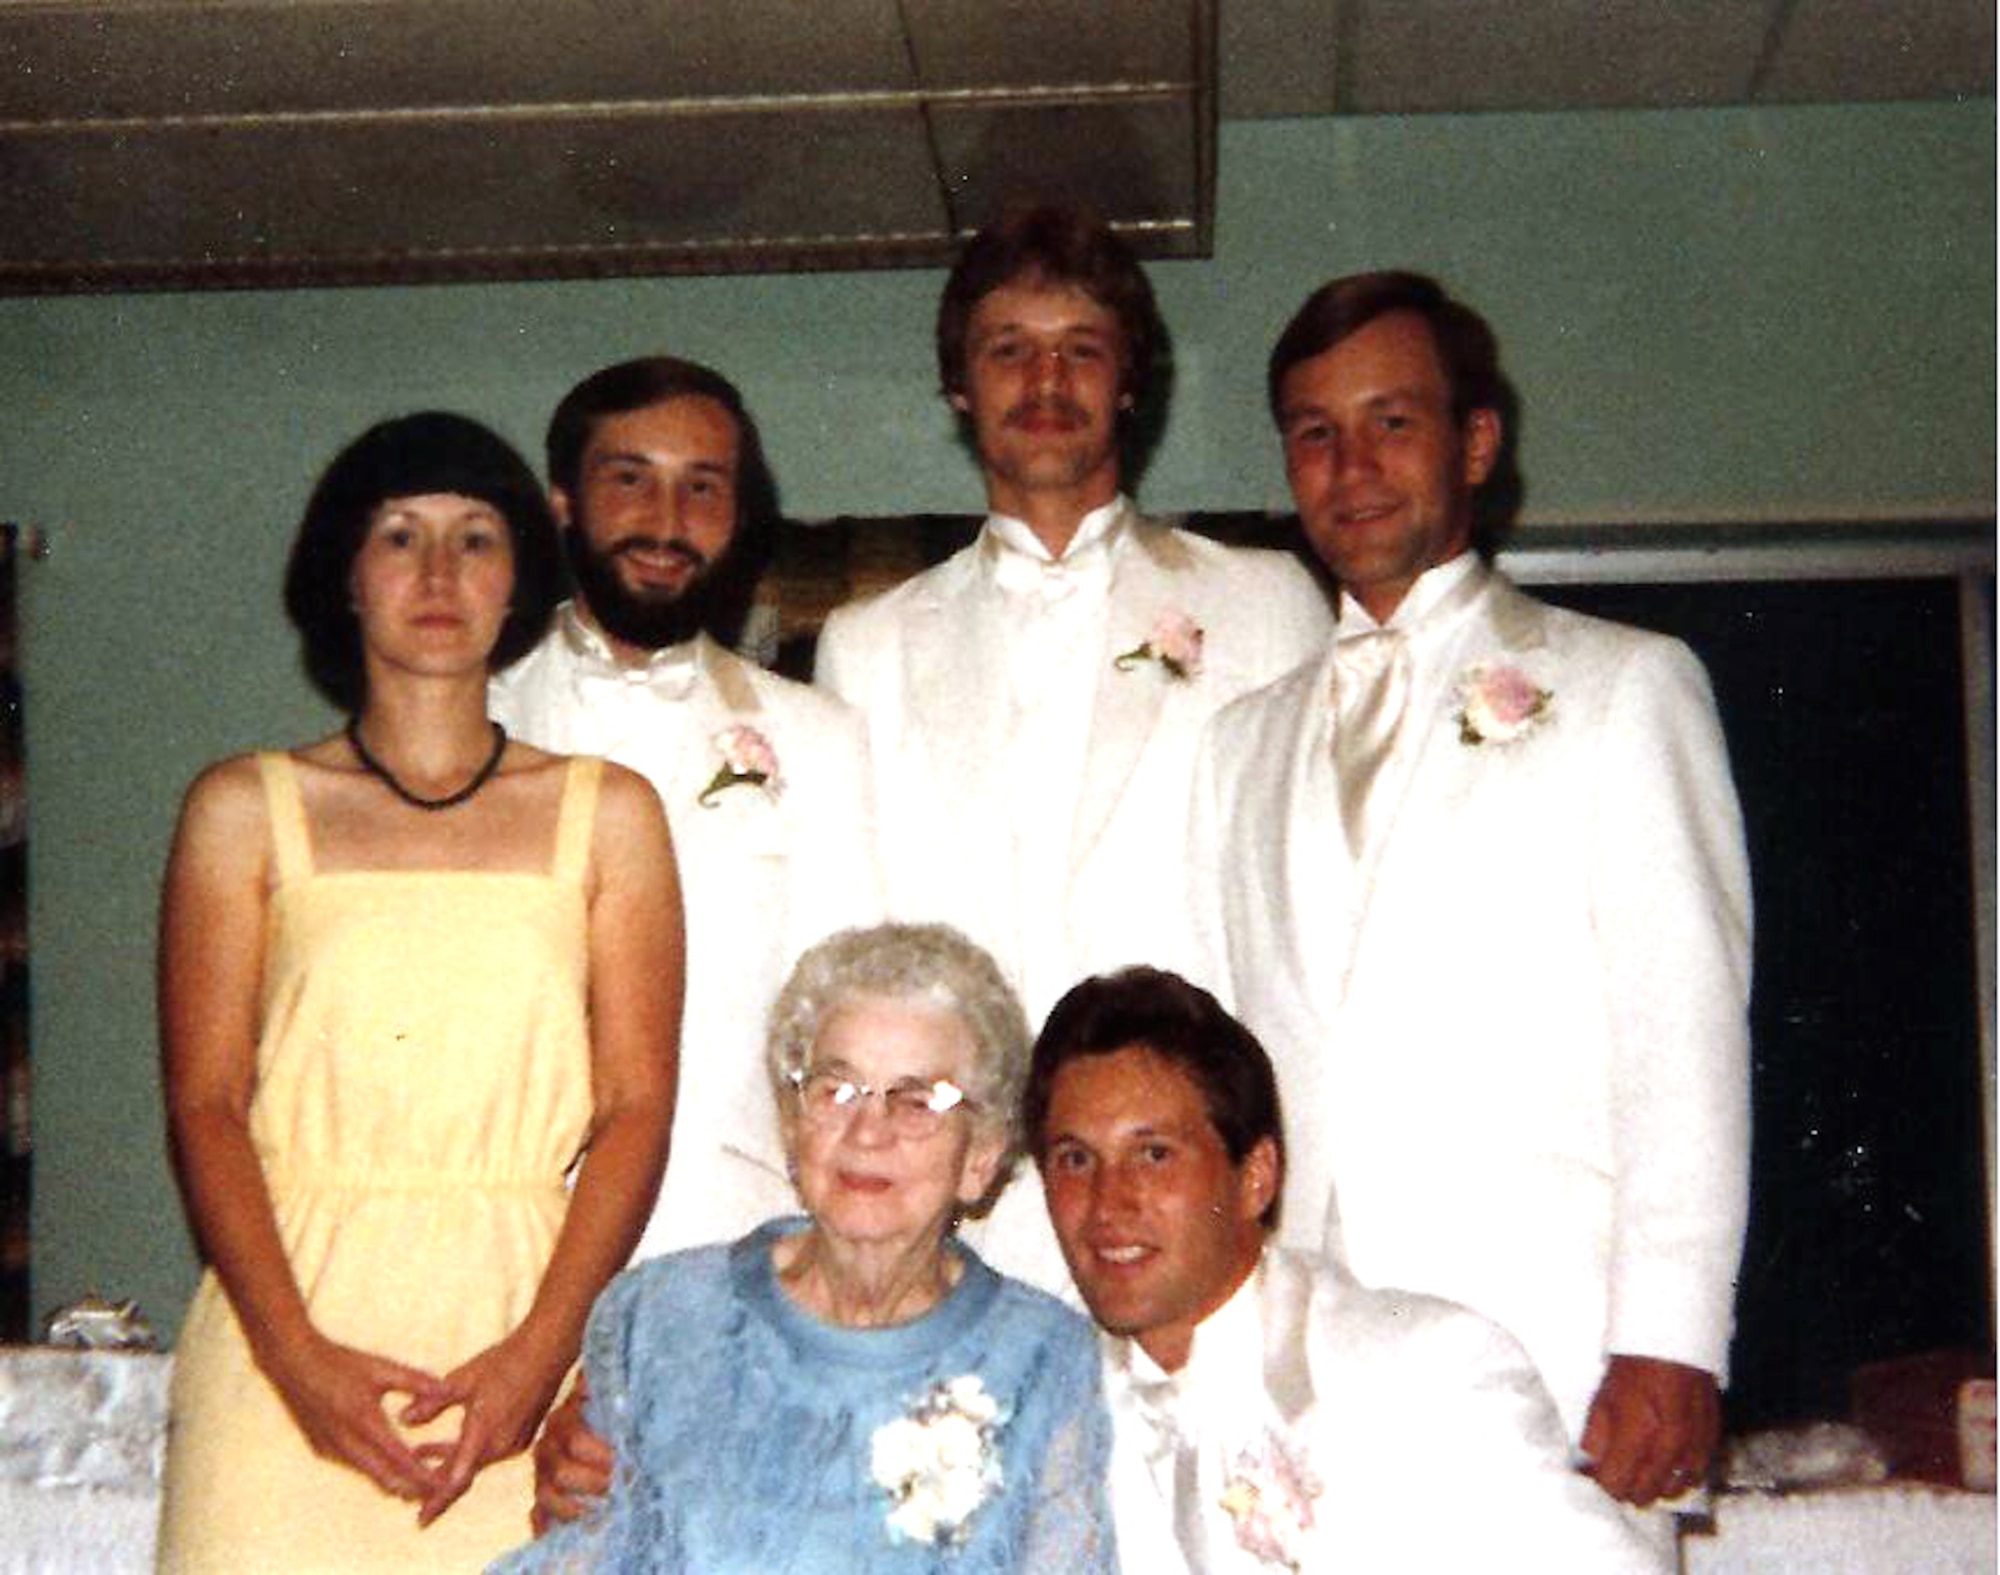 Standing from left:  Janis , Gary, Tim, Eric, (sitting) Mamie and Scott Crabtree at Scott's wedding in 1982.  Mamie is the Crabtree sibling's grandmother.  (Courtesy photo)